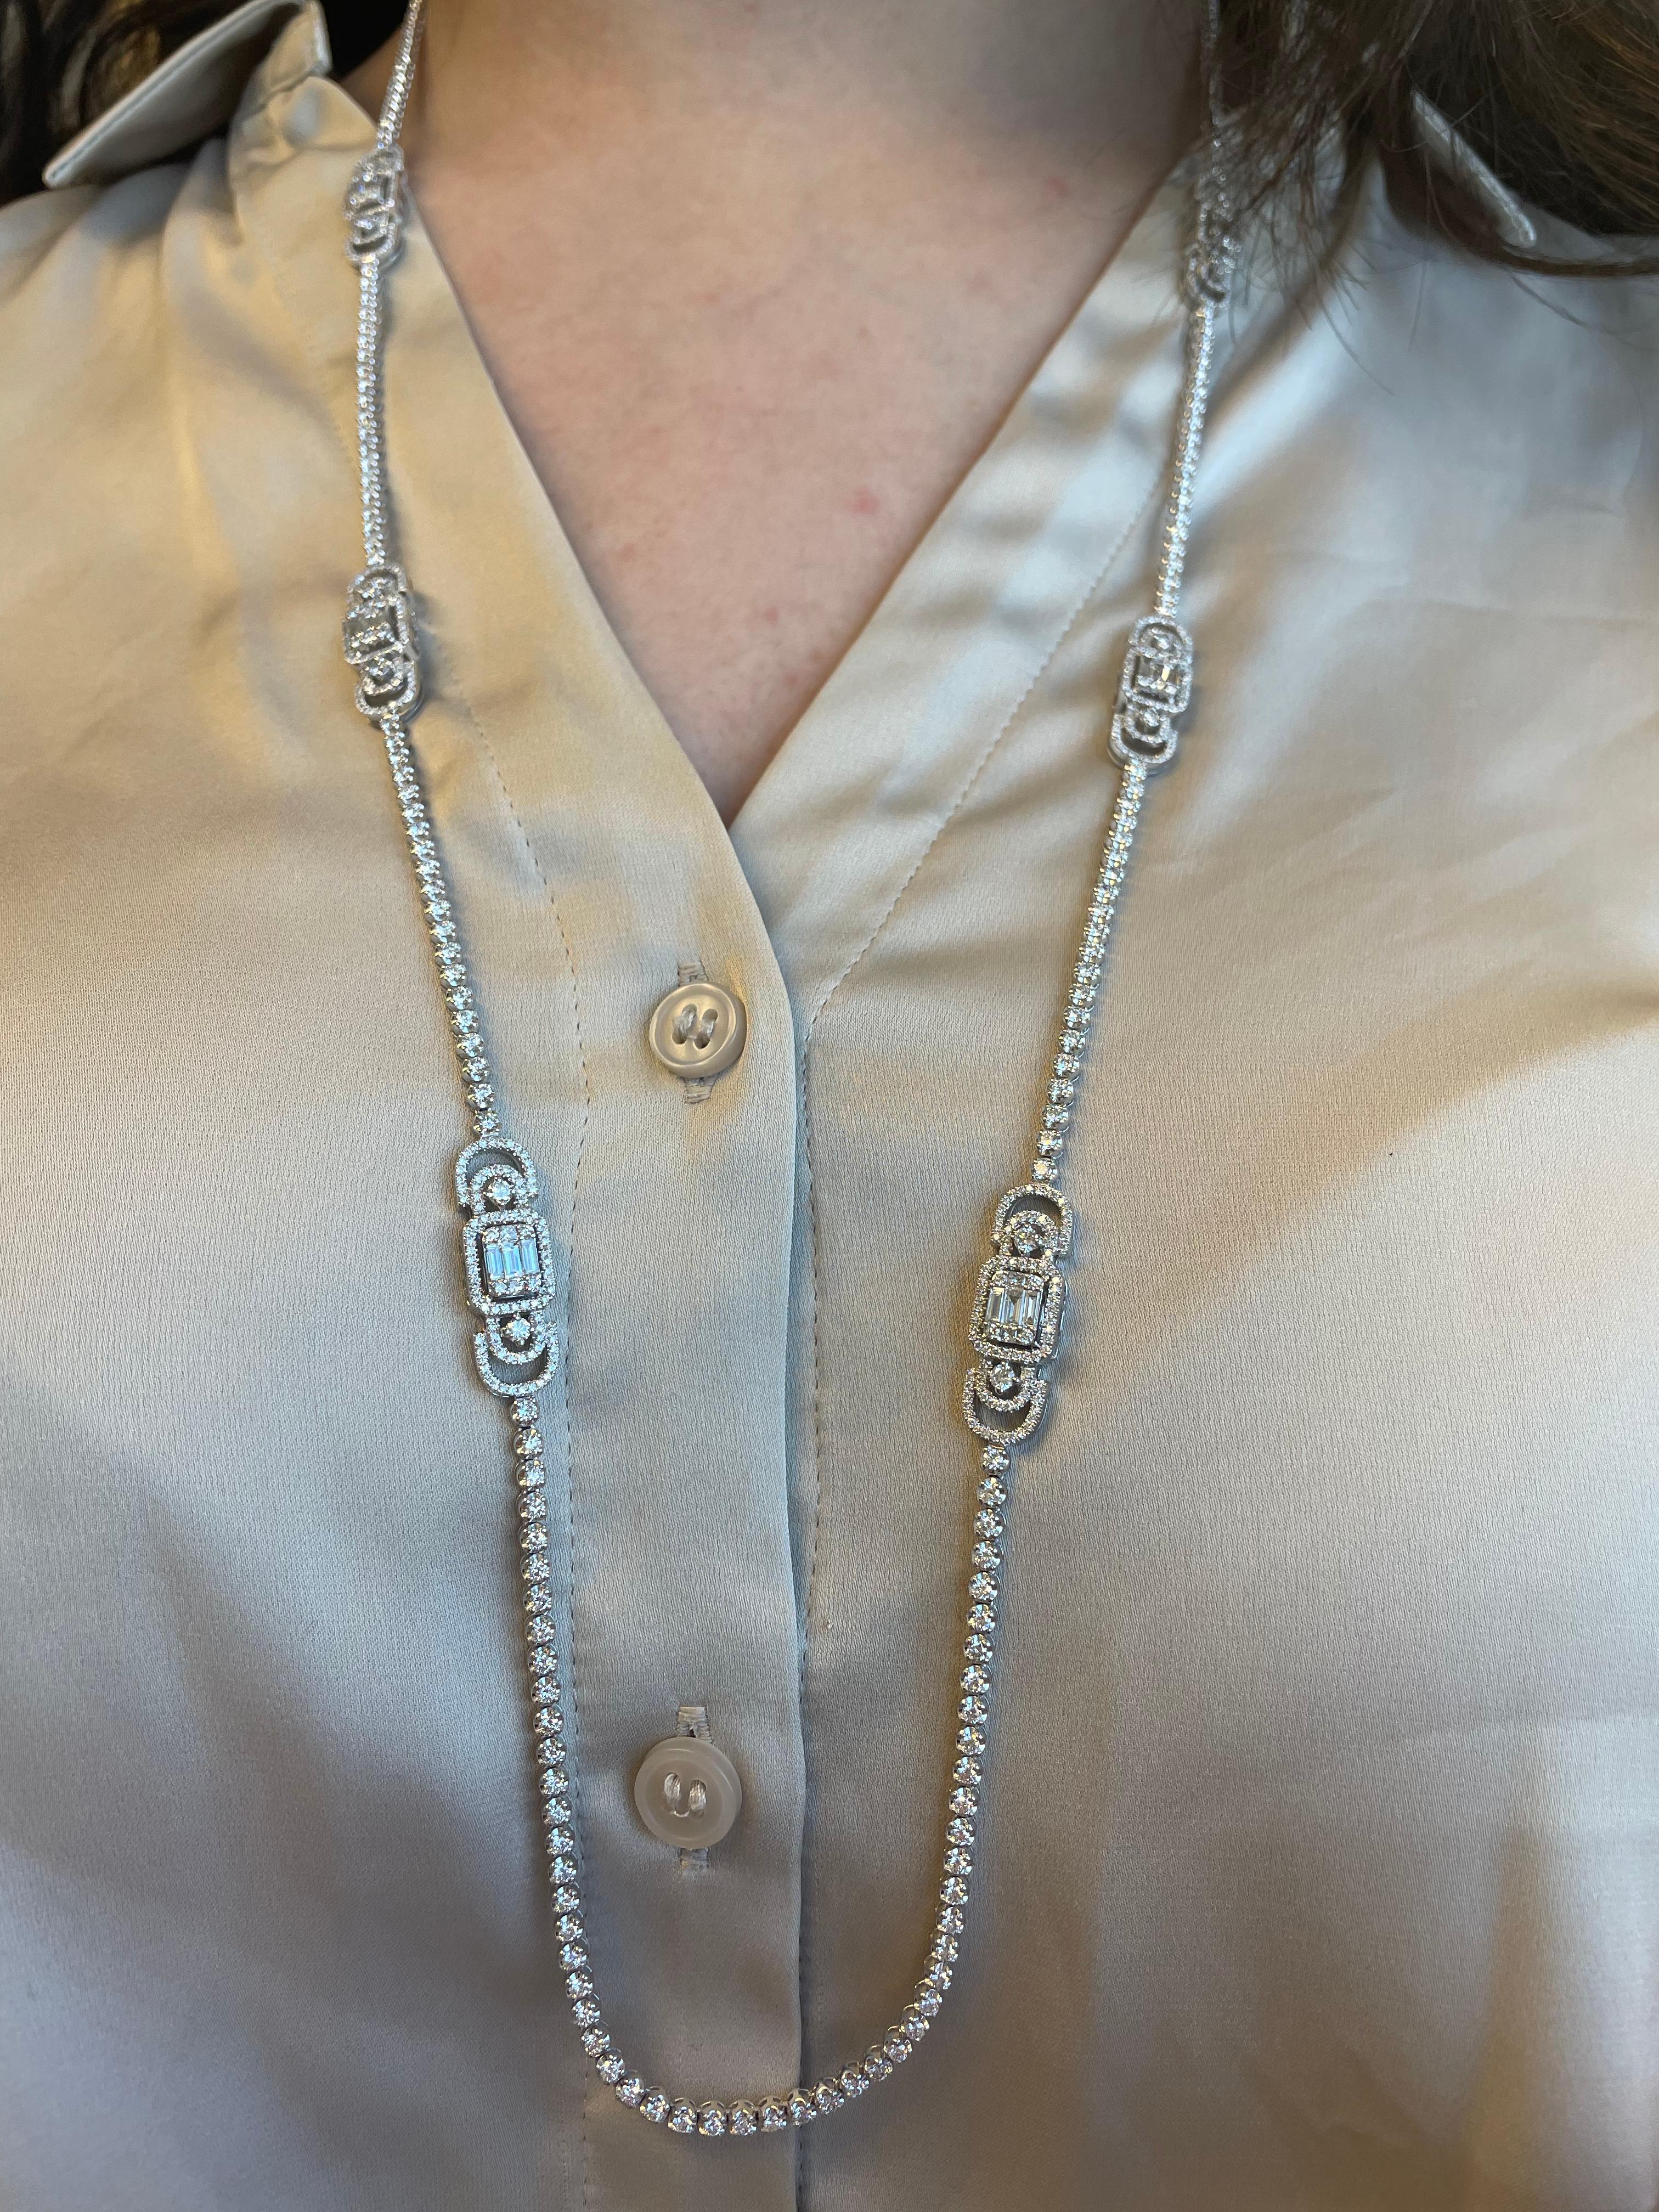 Exquisite and timeless diamonds tennis necklace, 31 inches. Illusion set to look like emerald cut diamonds. By Alexander Beverly Hills.
815 round, princess, and baguette shape diamonds, 9.04 carats total. Approximately G/H color and VS clarity. 18k